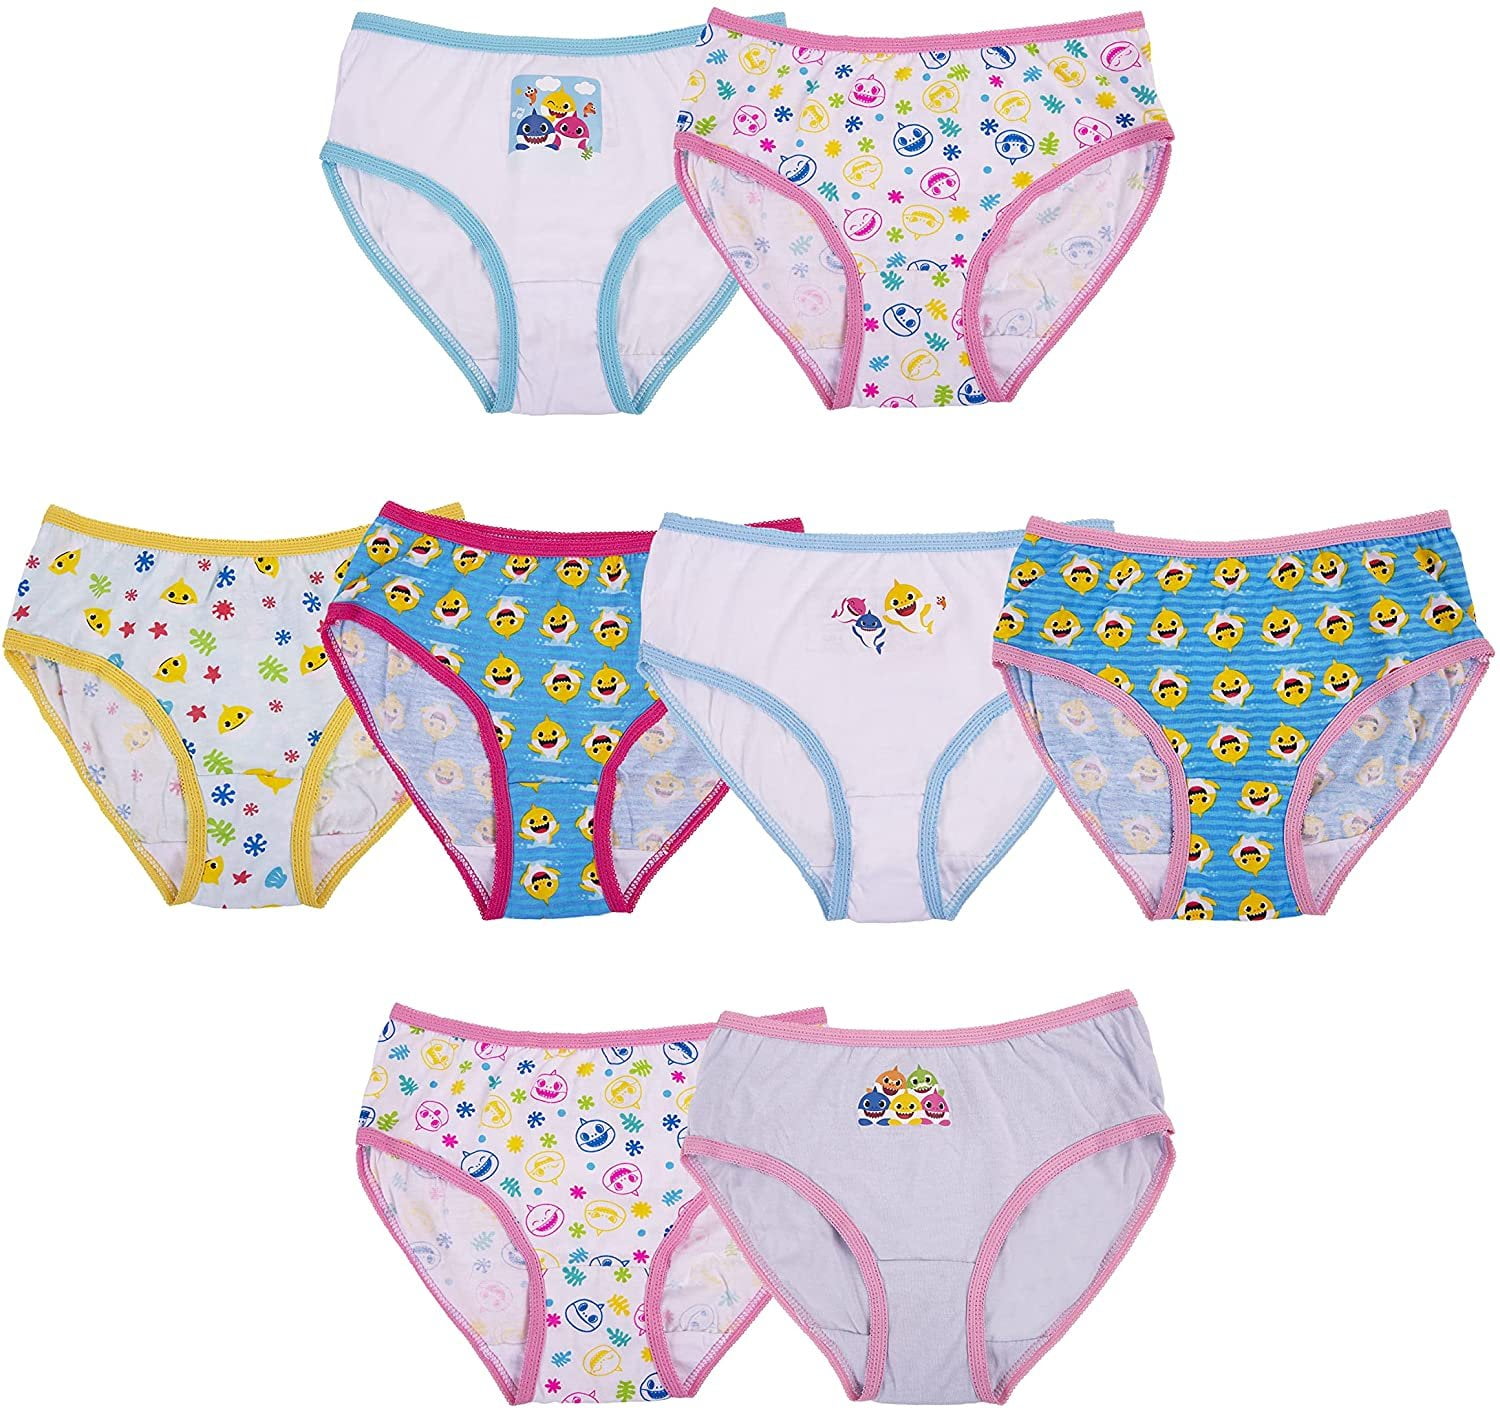 Girls Kids 3 Pack Briefs 100% Cotton Pants Knickers Licensed Age 2-10 Years